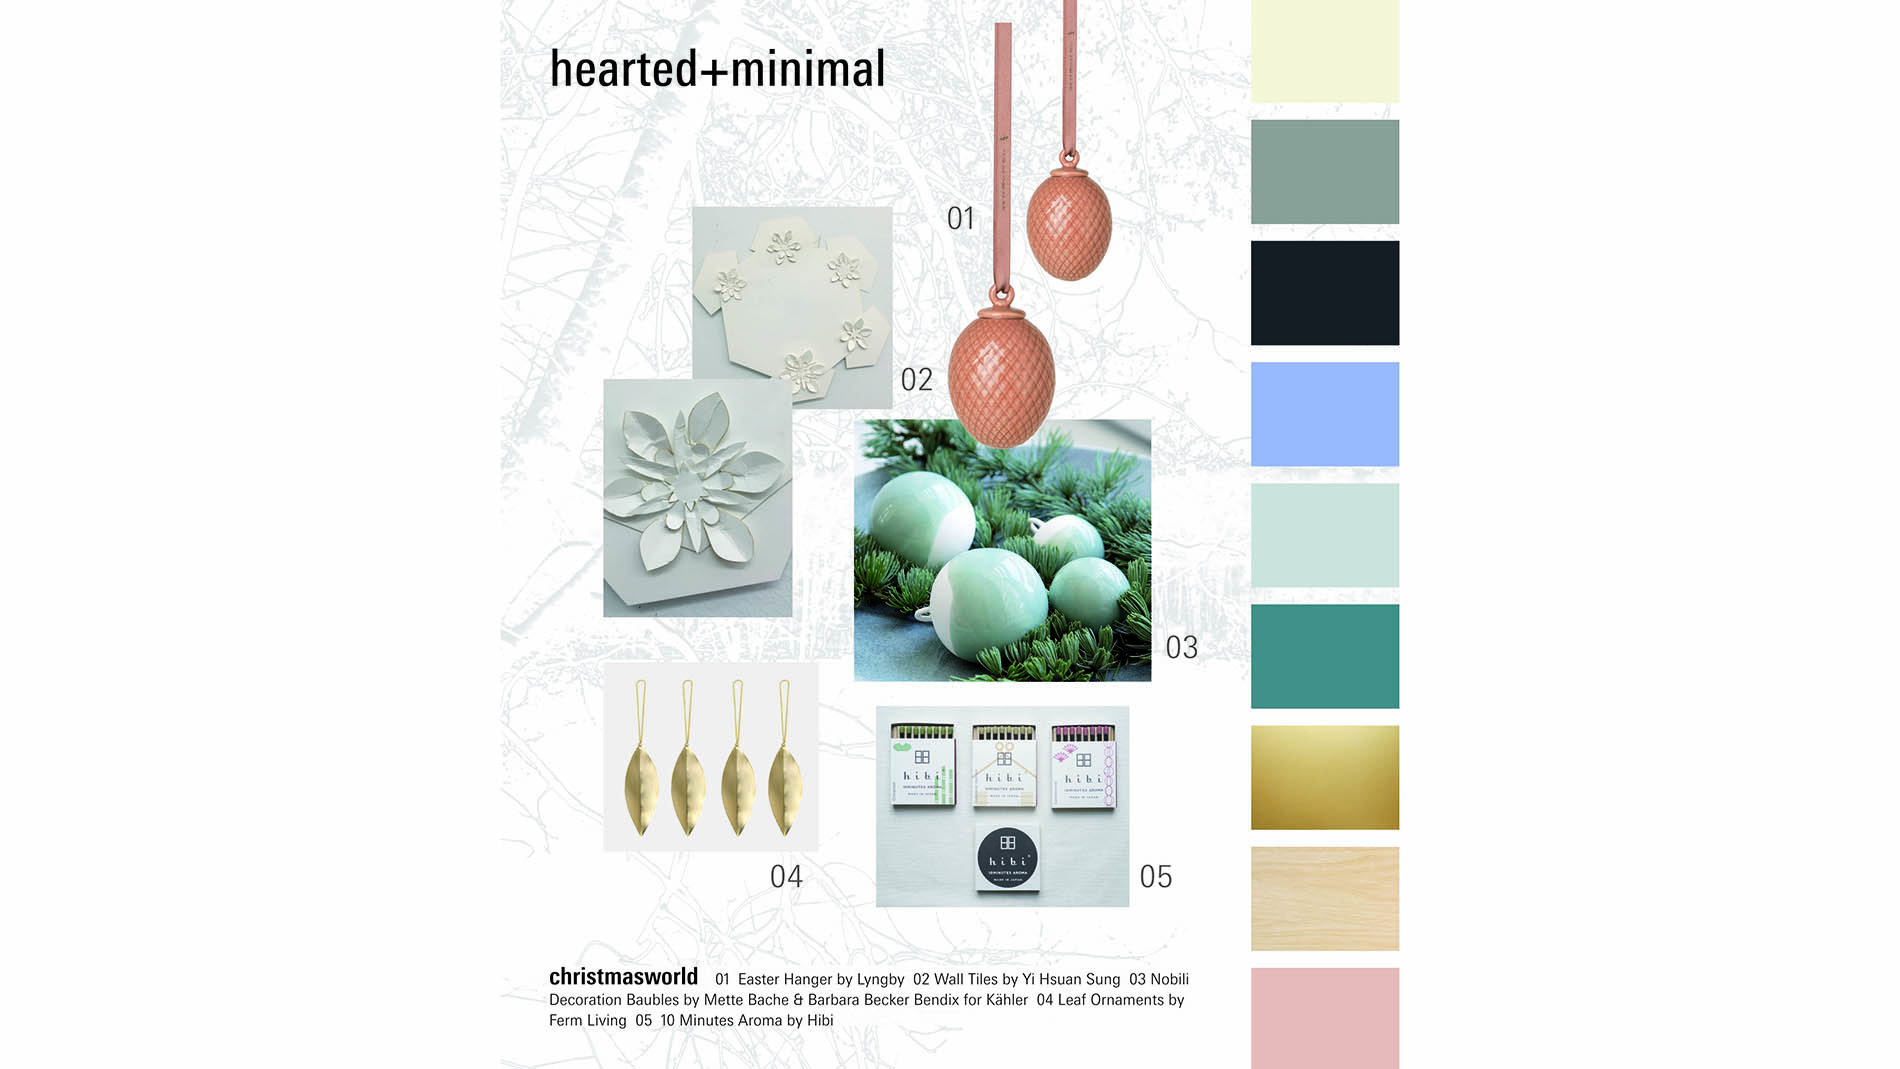 hearted+minimal: conscious use of resources